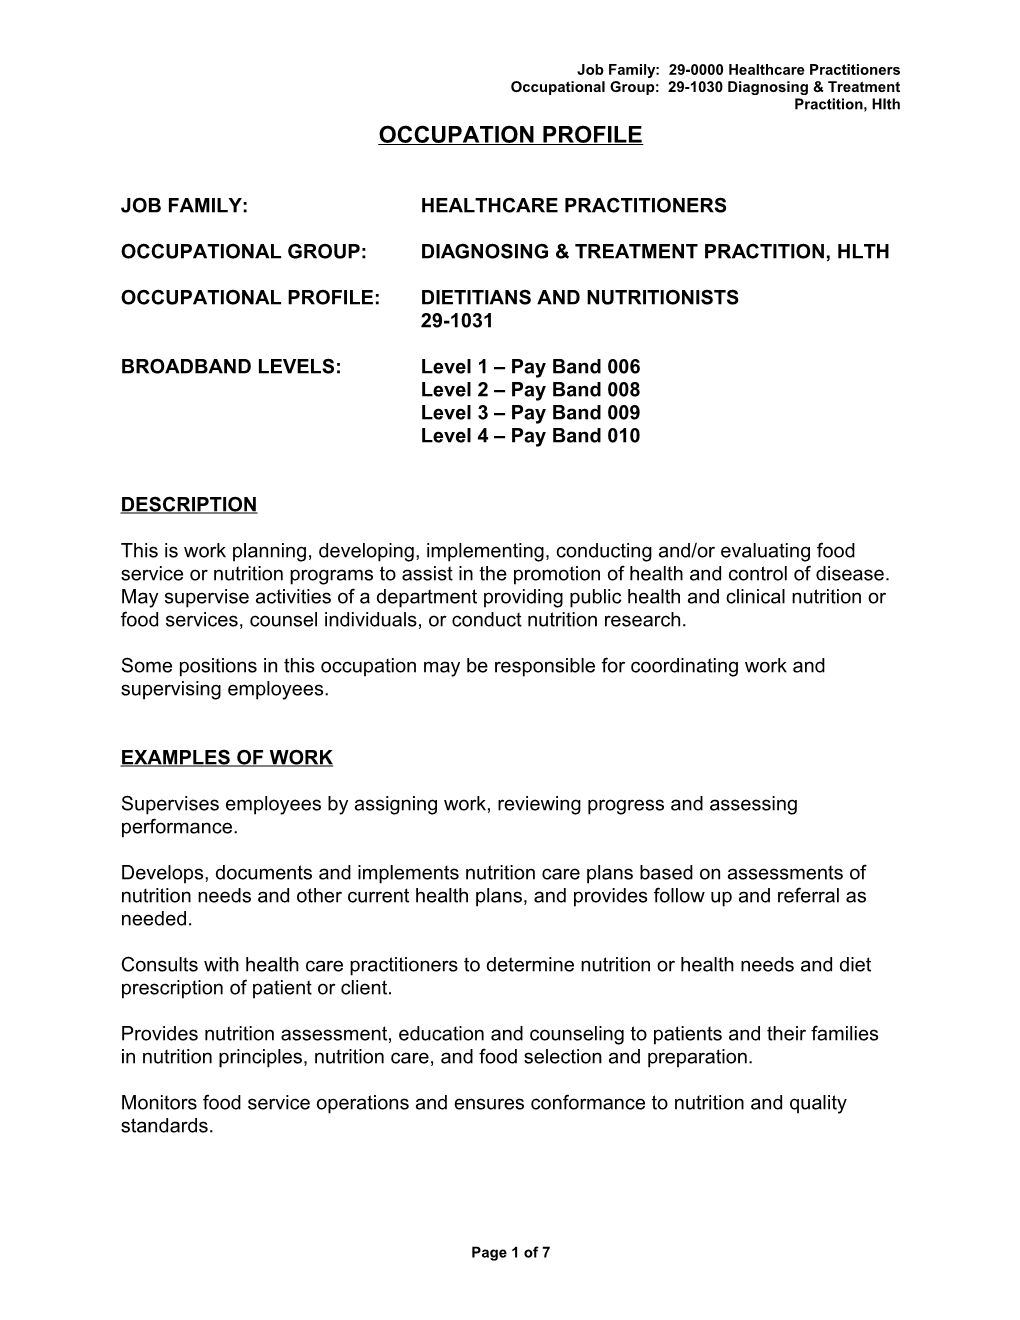 Job Family: 29-0000 Healthcare Practitioners s1